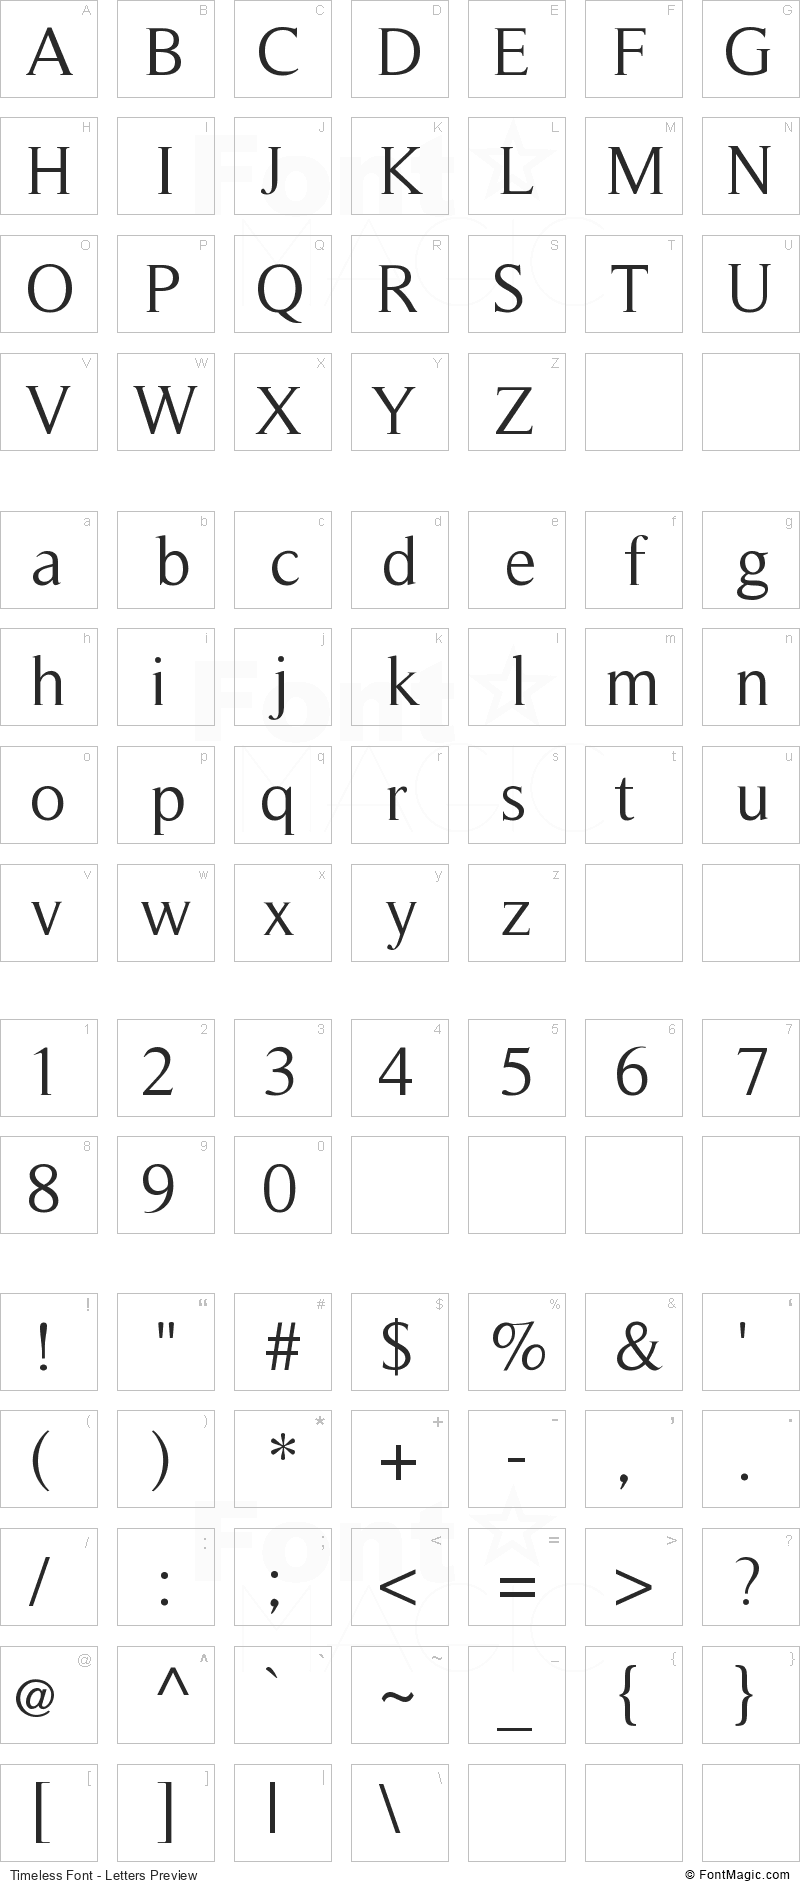 Timeless Font - All Latters Preview Chart